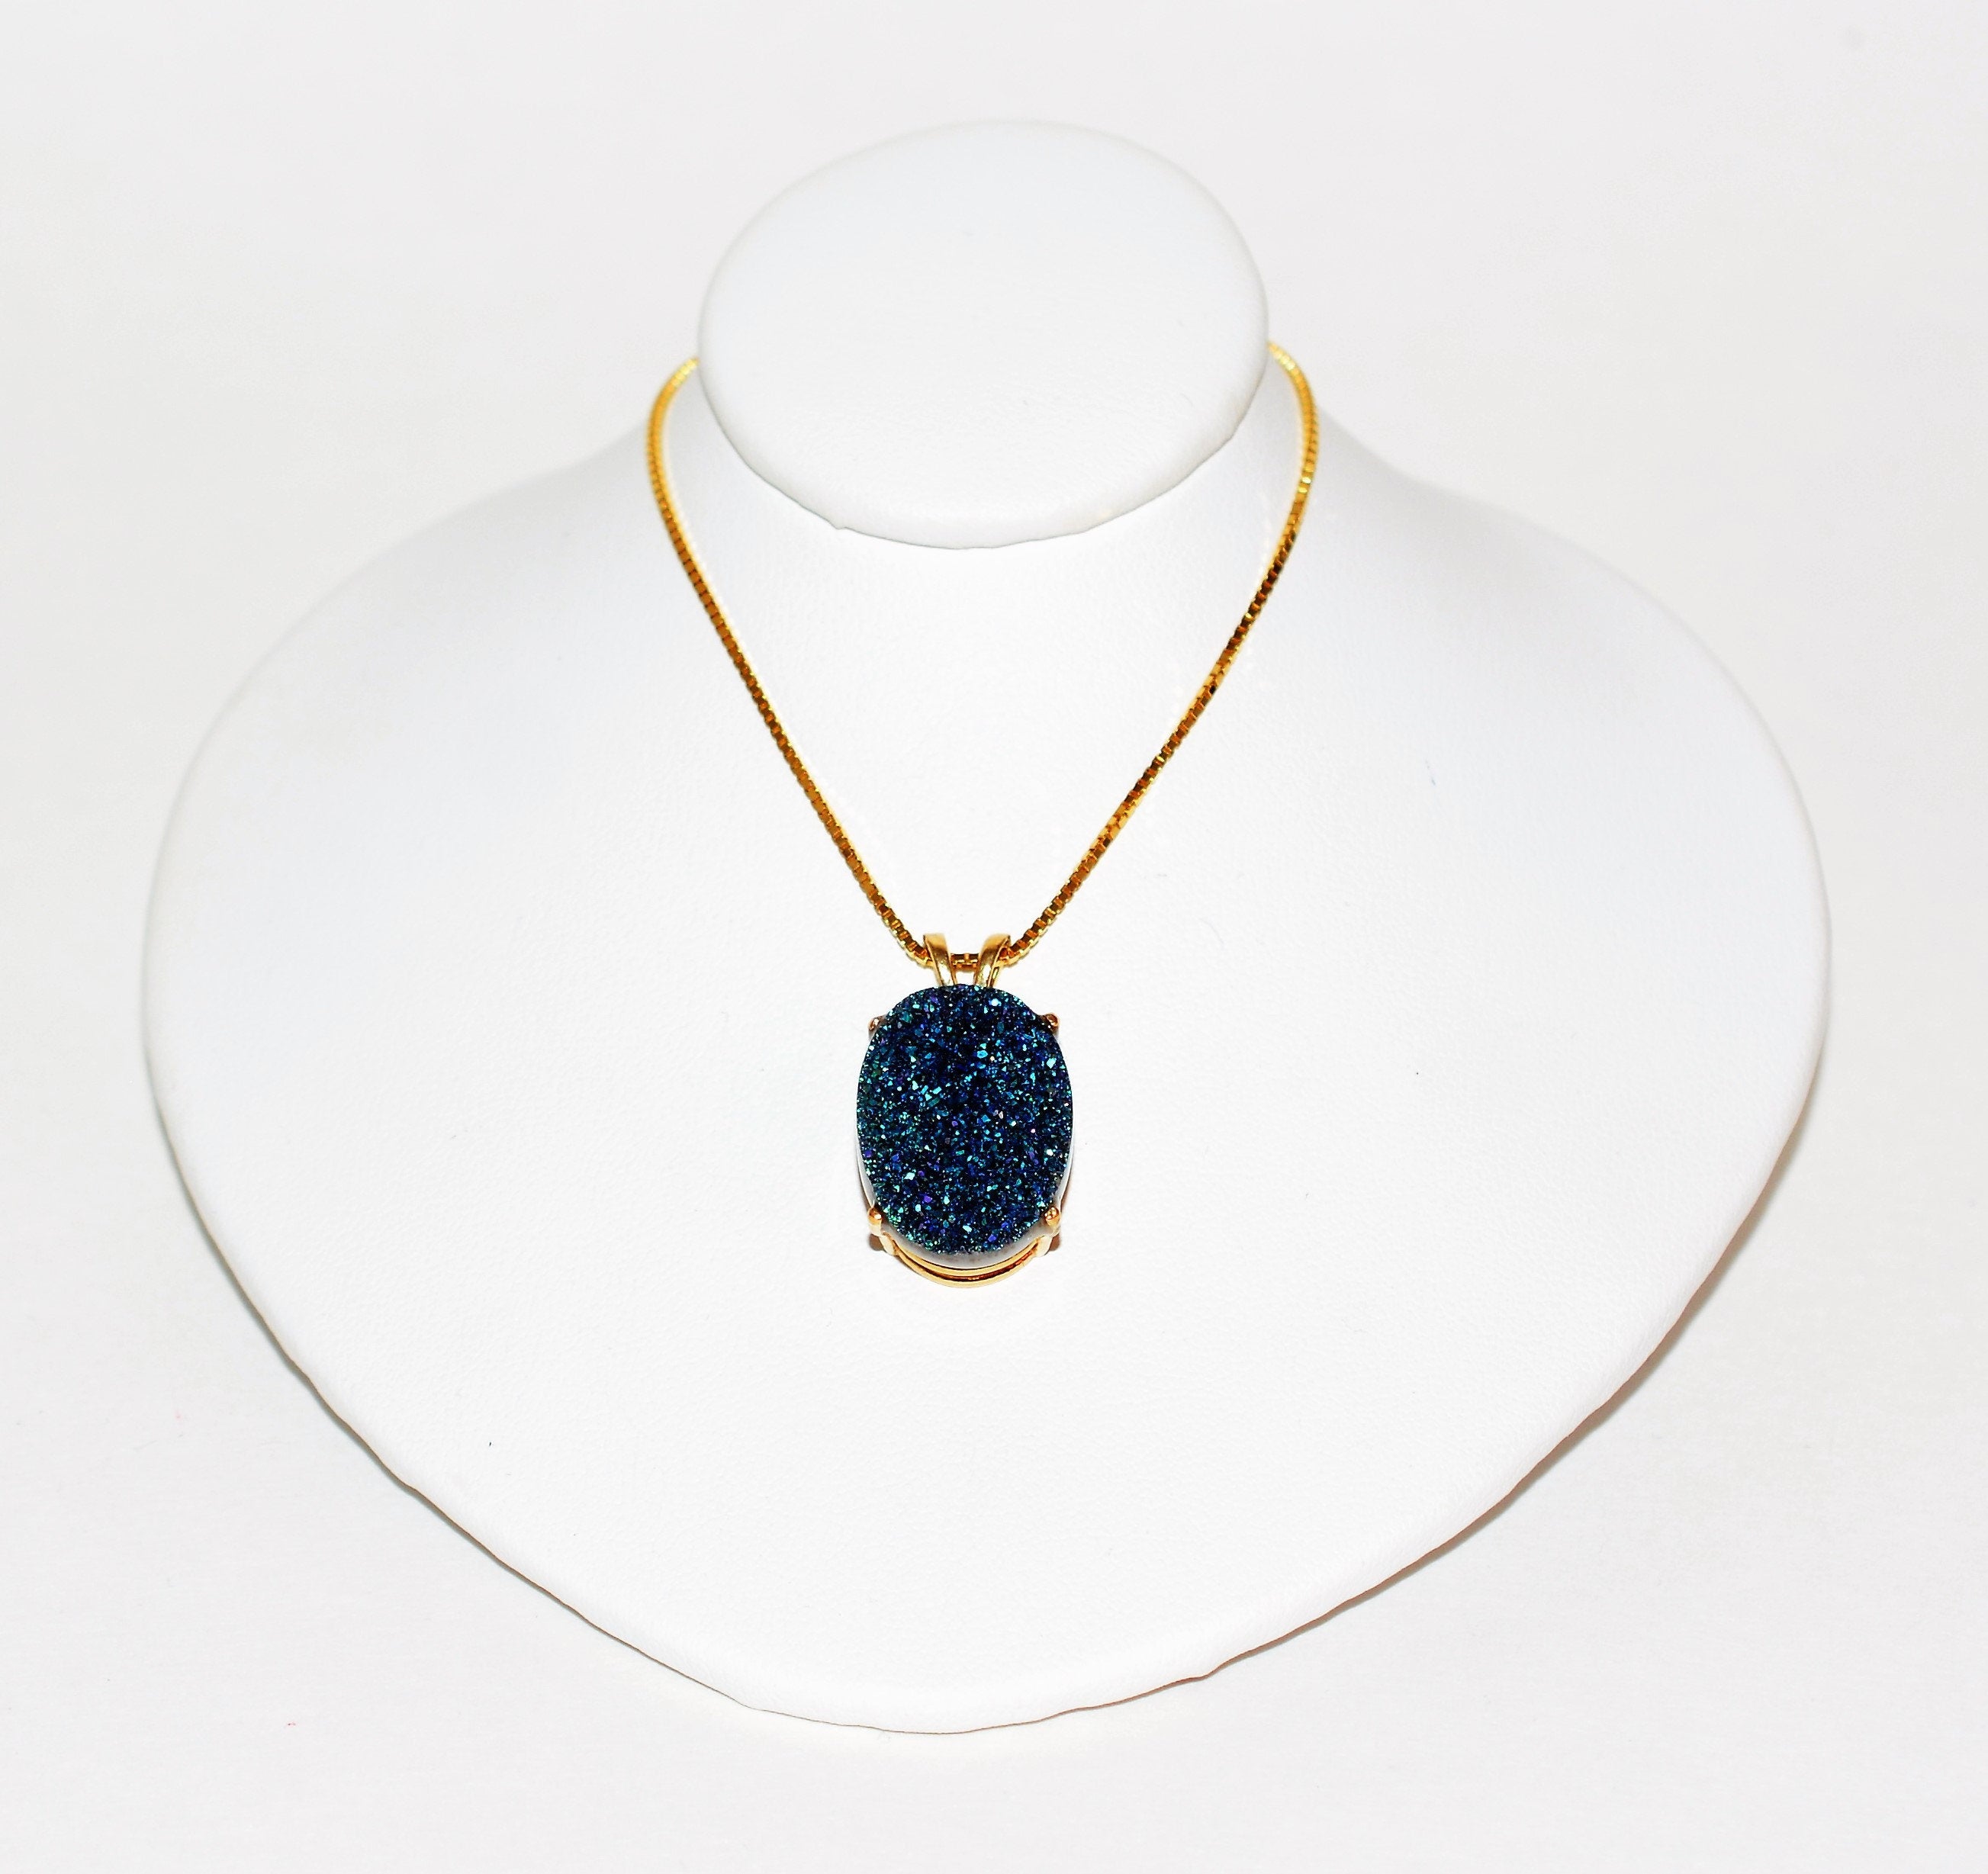 Natural Druzy Necklace 14K Solid Gold 12ct Pendant Necklace Solitaire Necklace Statement Necklace Vintage Jewelry Crystal Necklace MILOR